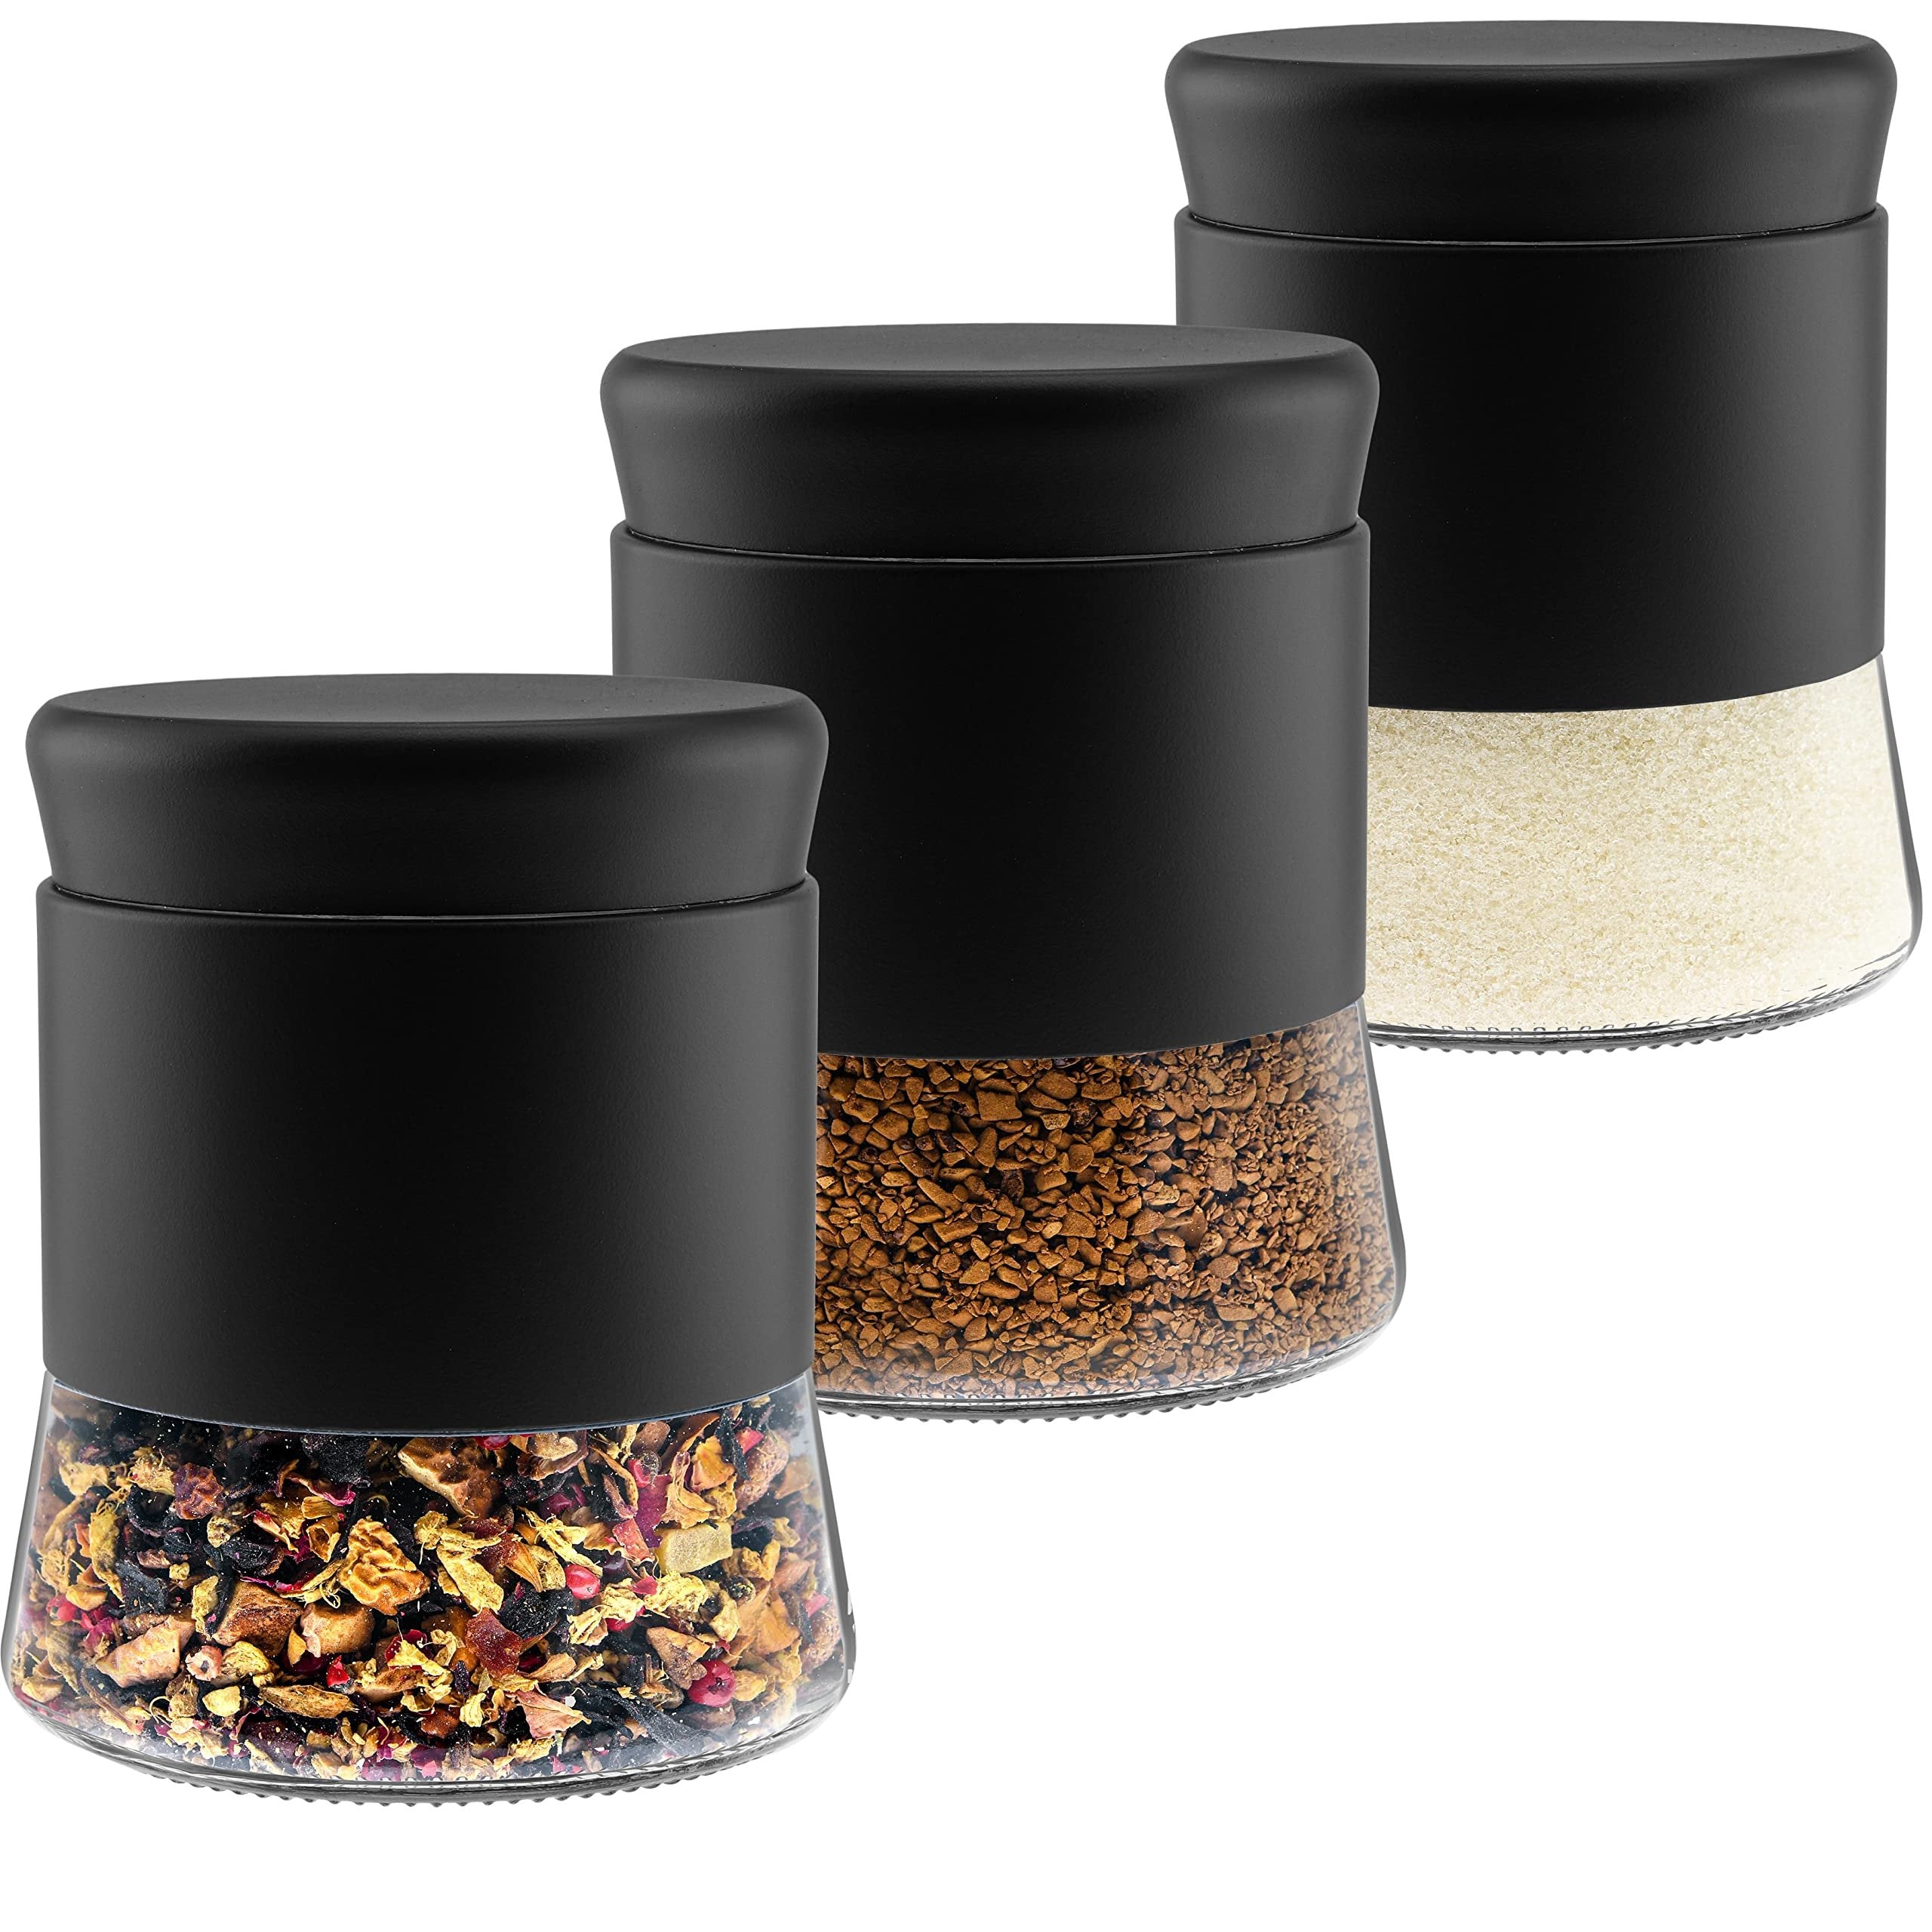 GADGETWIZ Sugar Tea Coffee Containers Set, Black Canisters for Kitchen, Stainless Steel Apothecary Jar, Home Décor Centerpiece Decorative Kitchen. 26 OZ